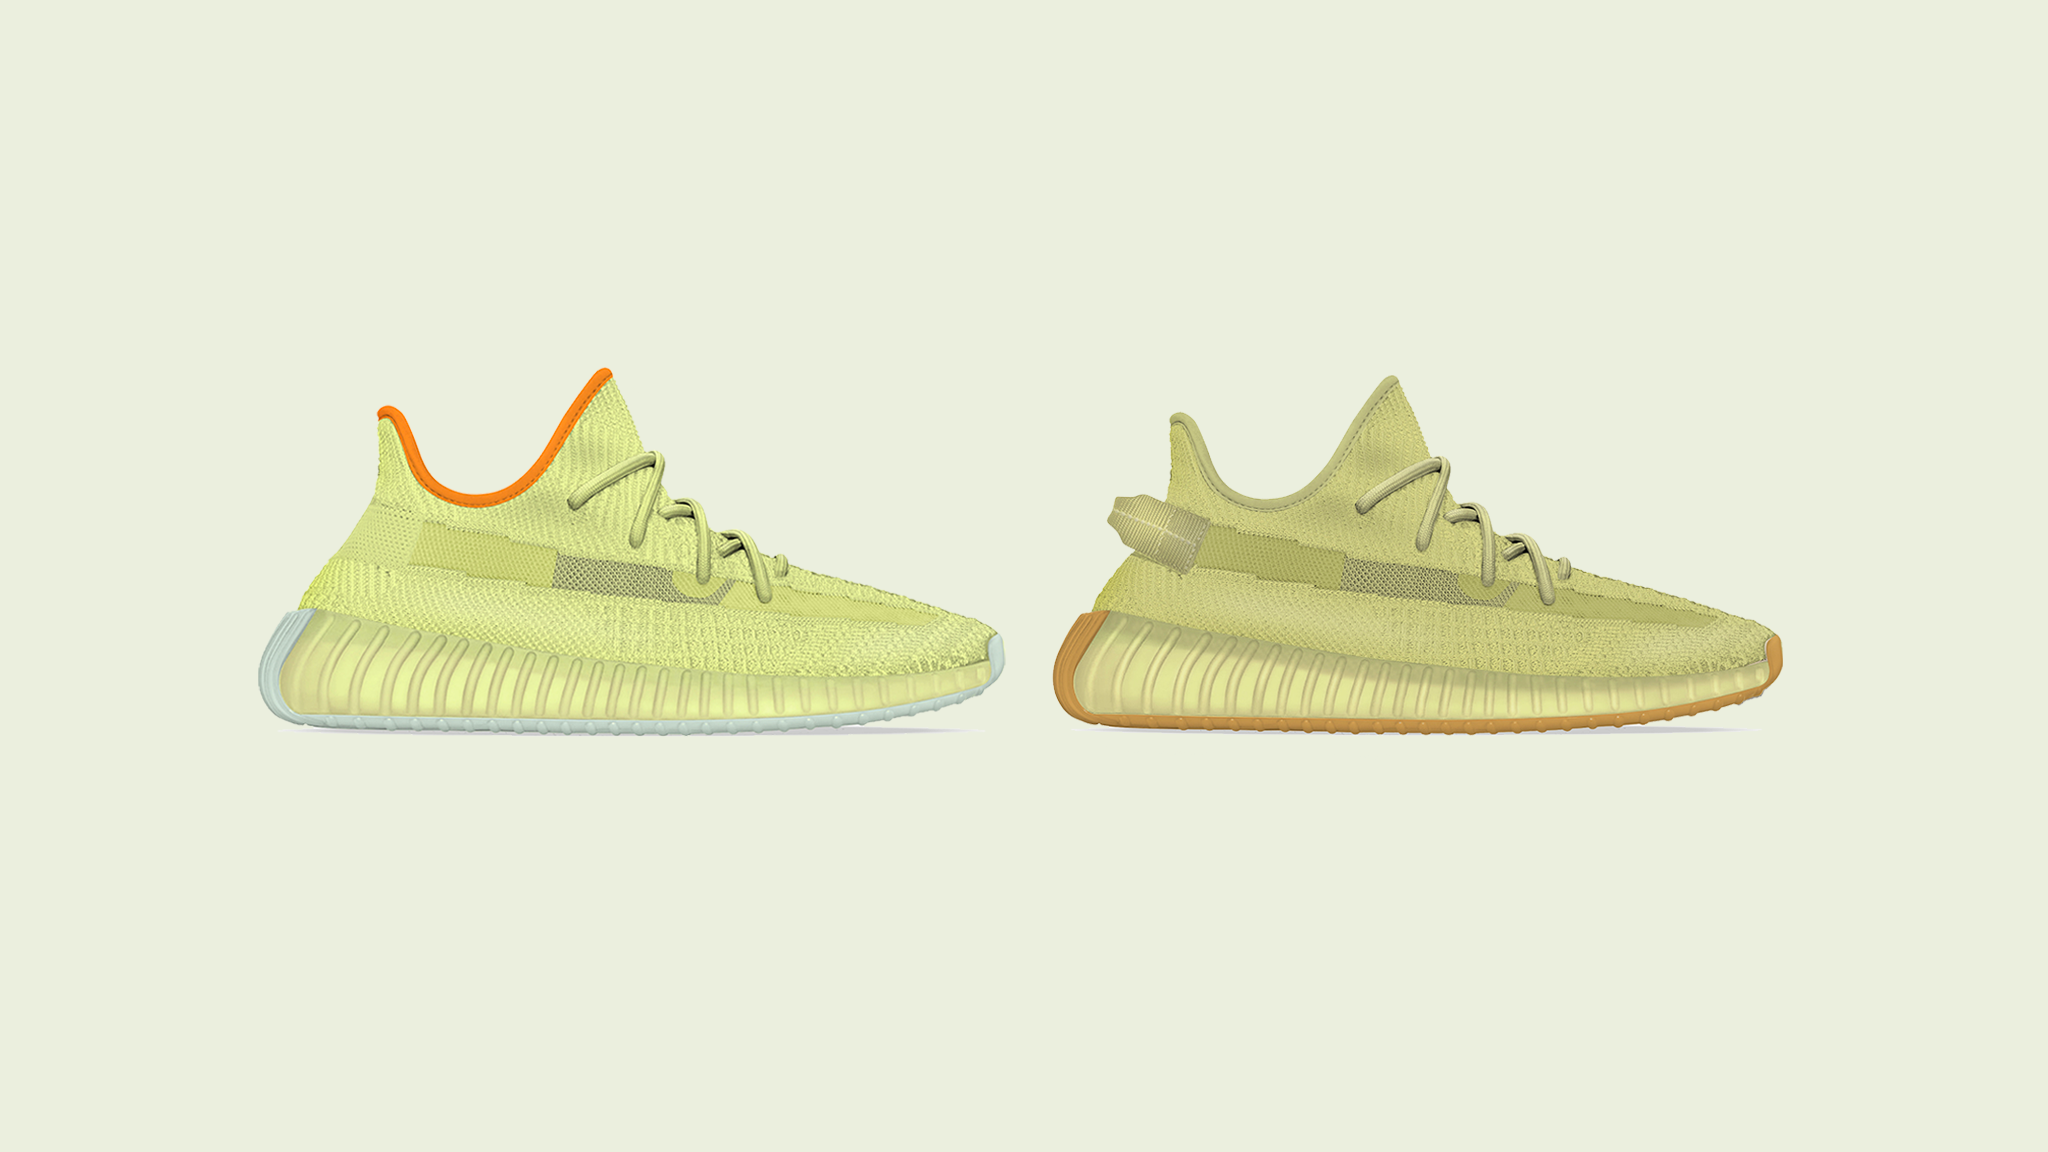 The Adidas Yeezy Boost 350 V2 “Marsh” and “Sulfur” Have Been Unveiled